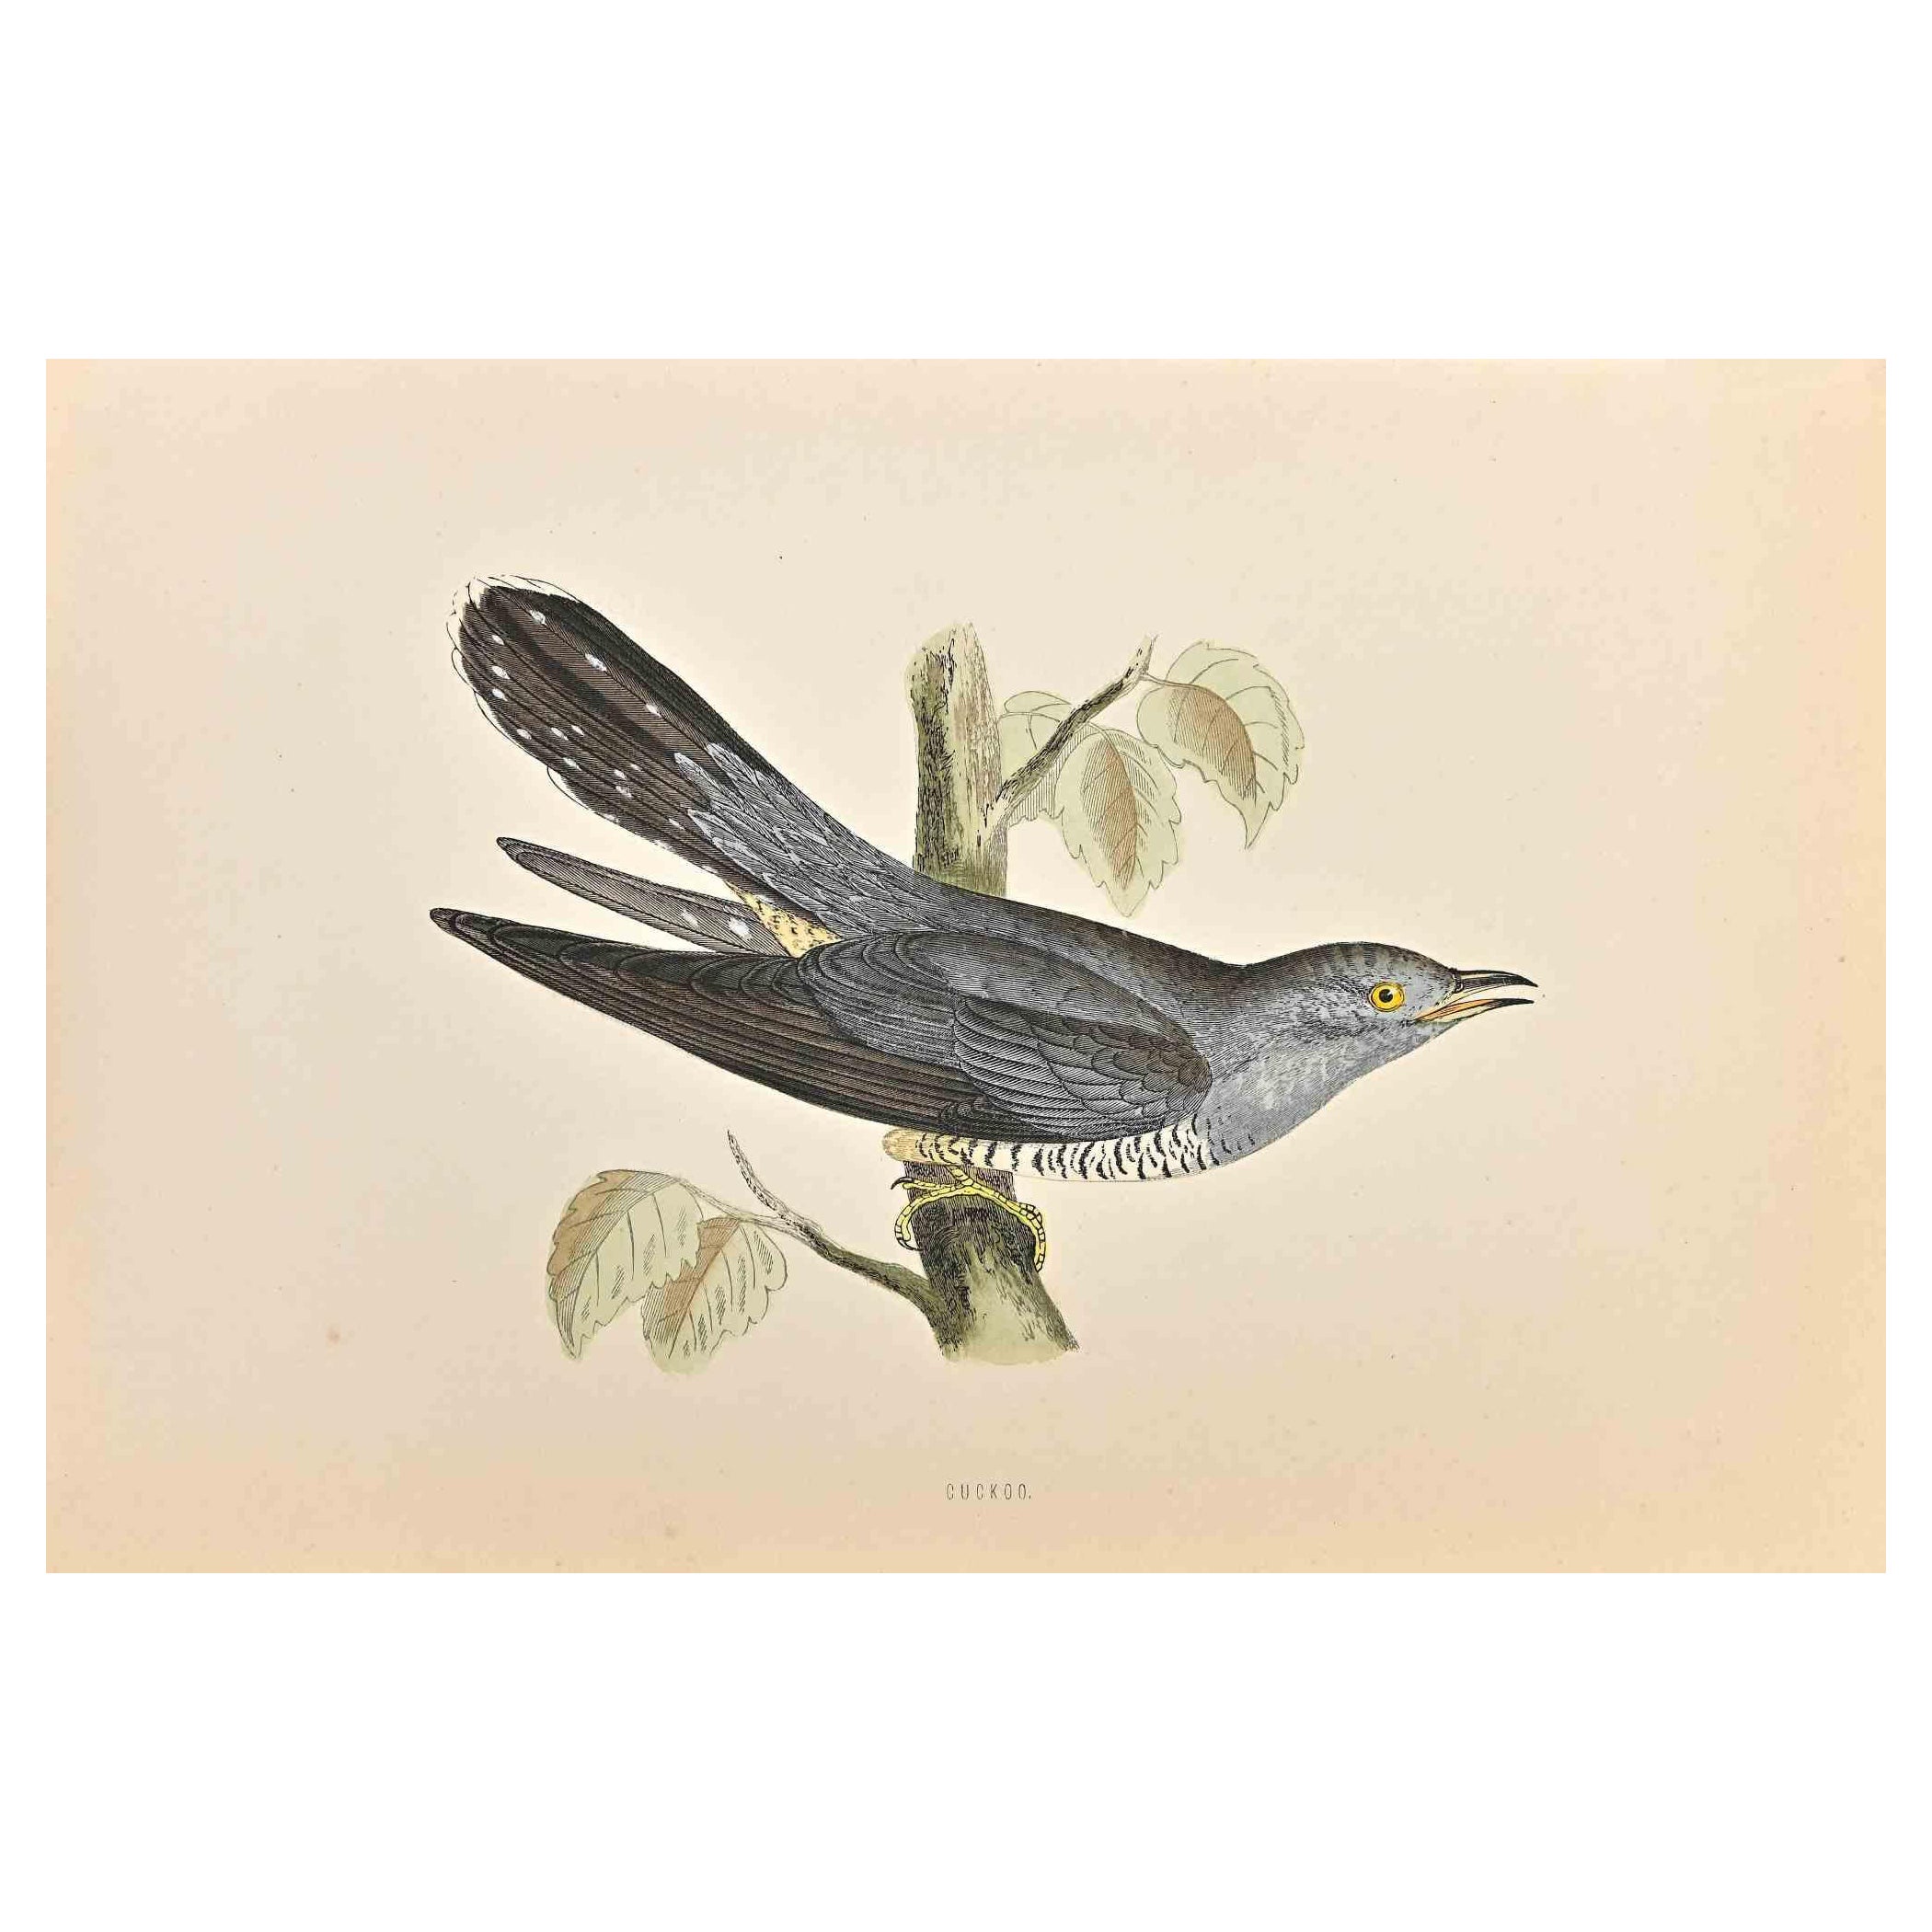 Cuckoo is a modern artwork realized in 1870 by the British artist Alexander Francis Lydon (1836-1917).

Woodcut print on ivory-colored paper.

Hand-colored, published by London, Bell & Sons, 1870.  

The name of the bird is printed on the plate.